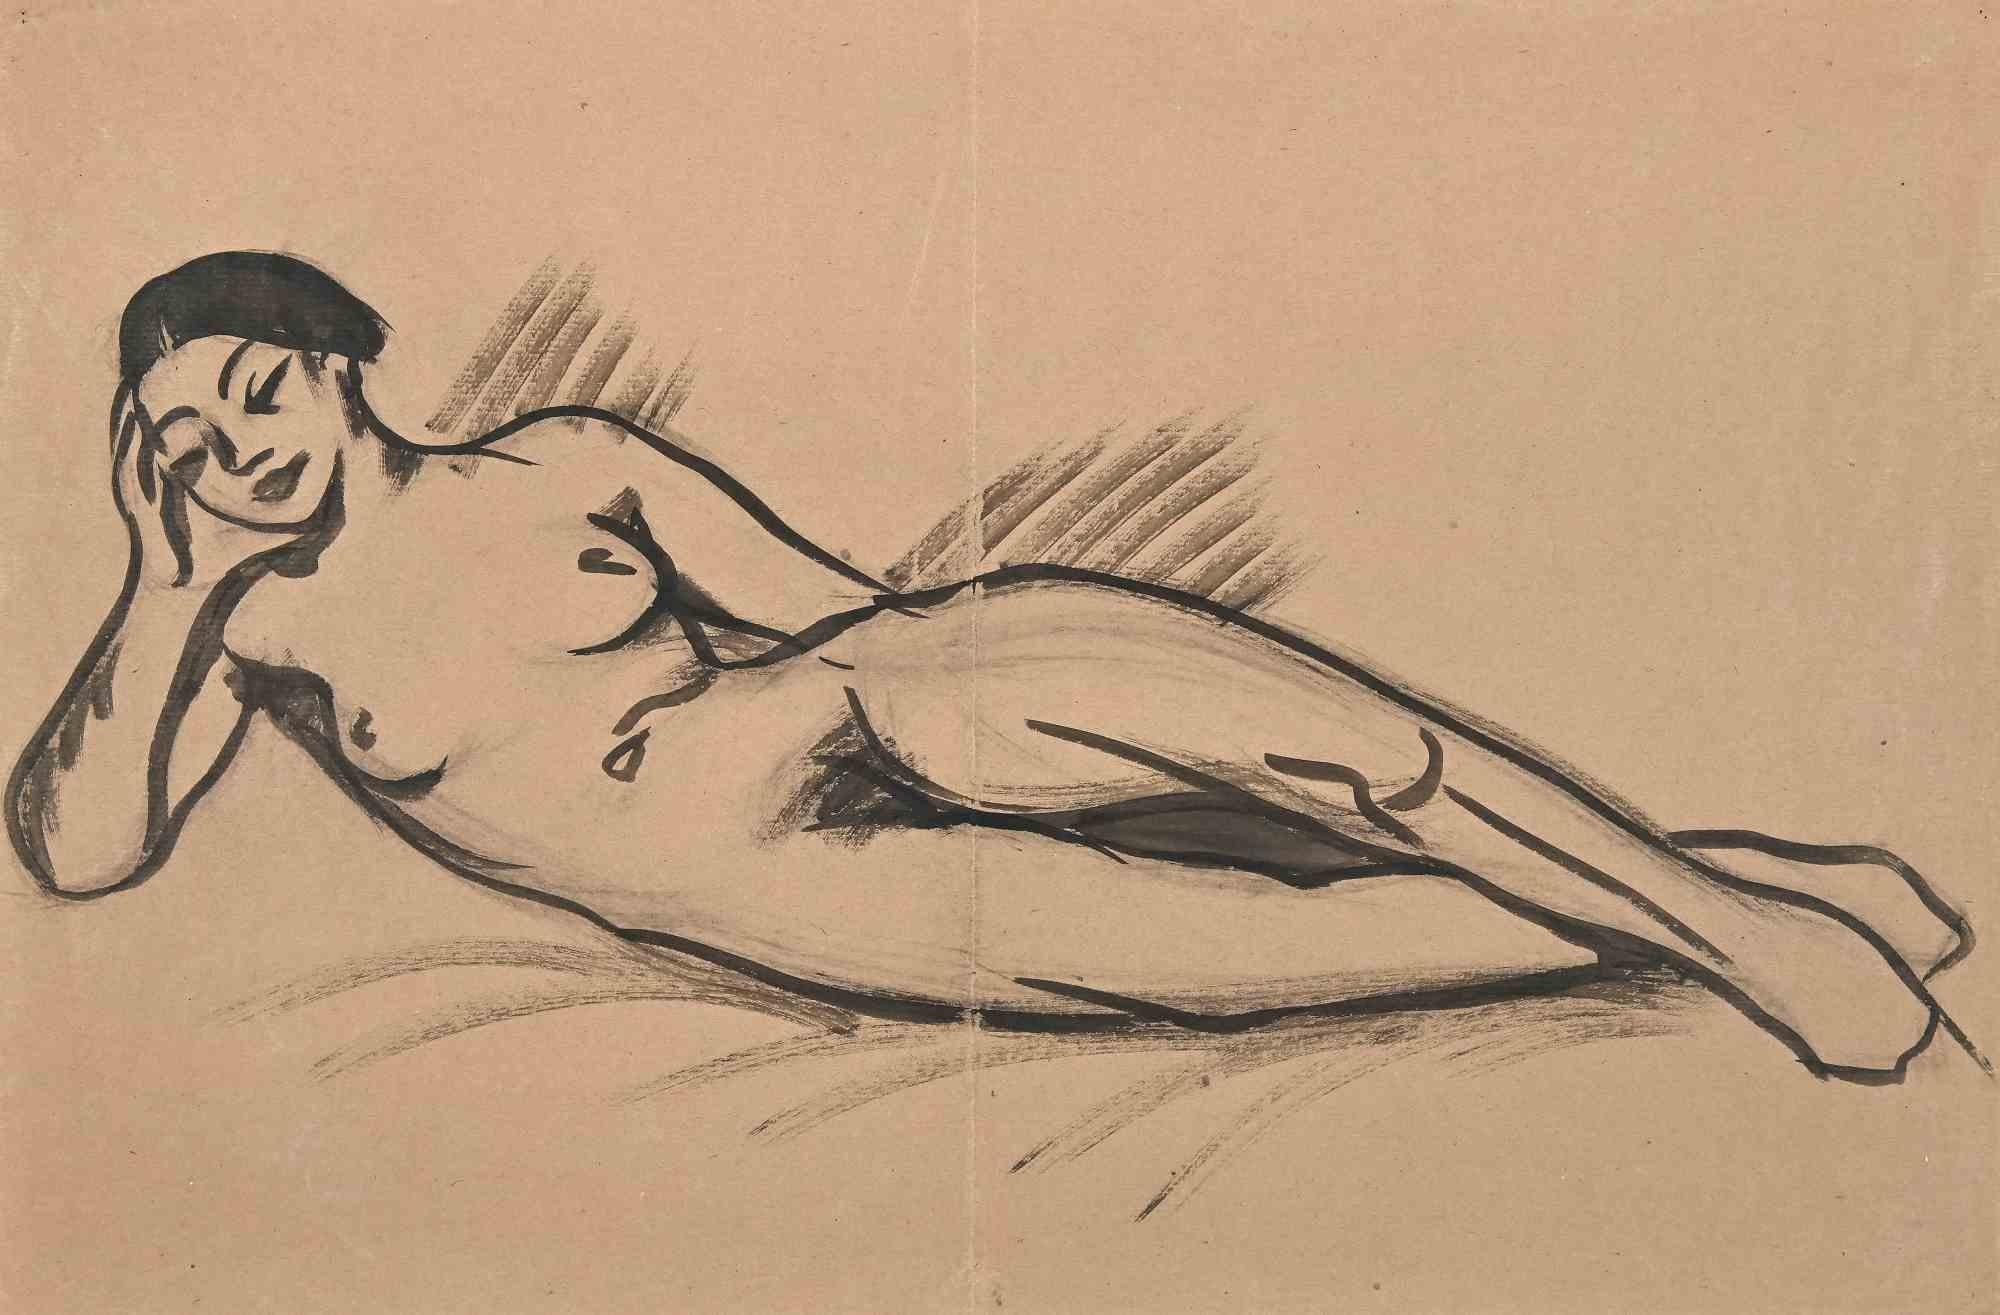 Reclined Nude is a drawing in watercolor realized in the Mid-20th Century by Jean Delpech (1916-1988). 

Good conditions except for folding.

The artwork is realized in deft strokes through mastery.

Jean-Raymond Delpech (1988-1916) is a French